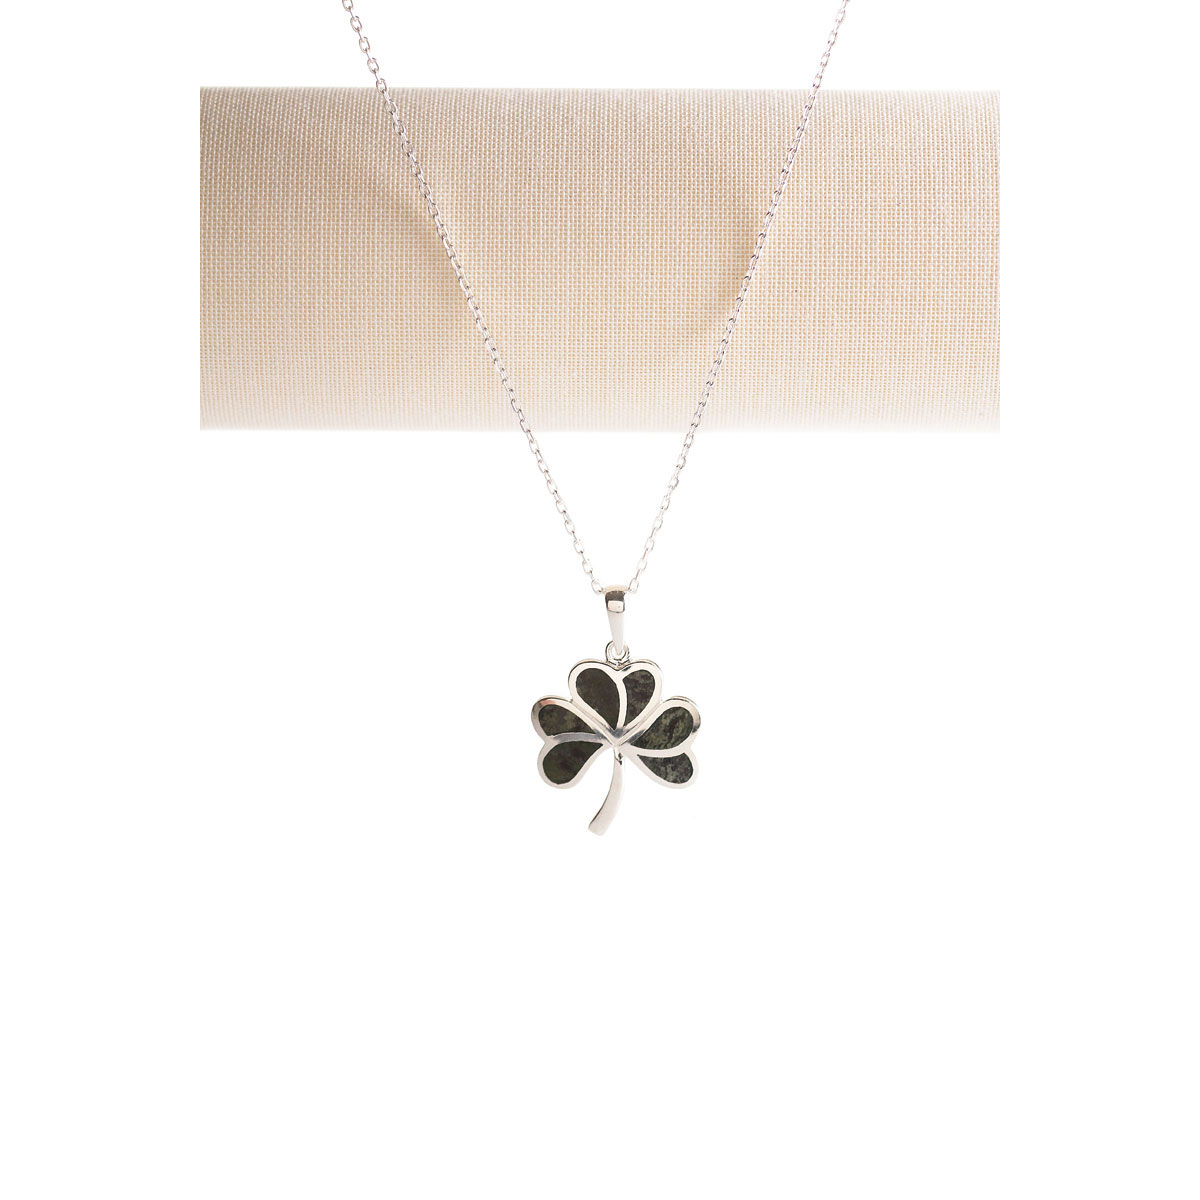 Cashs Ireland Sterling Silver and Connemara Marble Shamrock Pendant Necklace